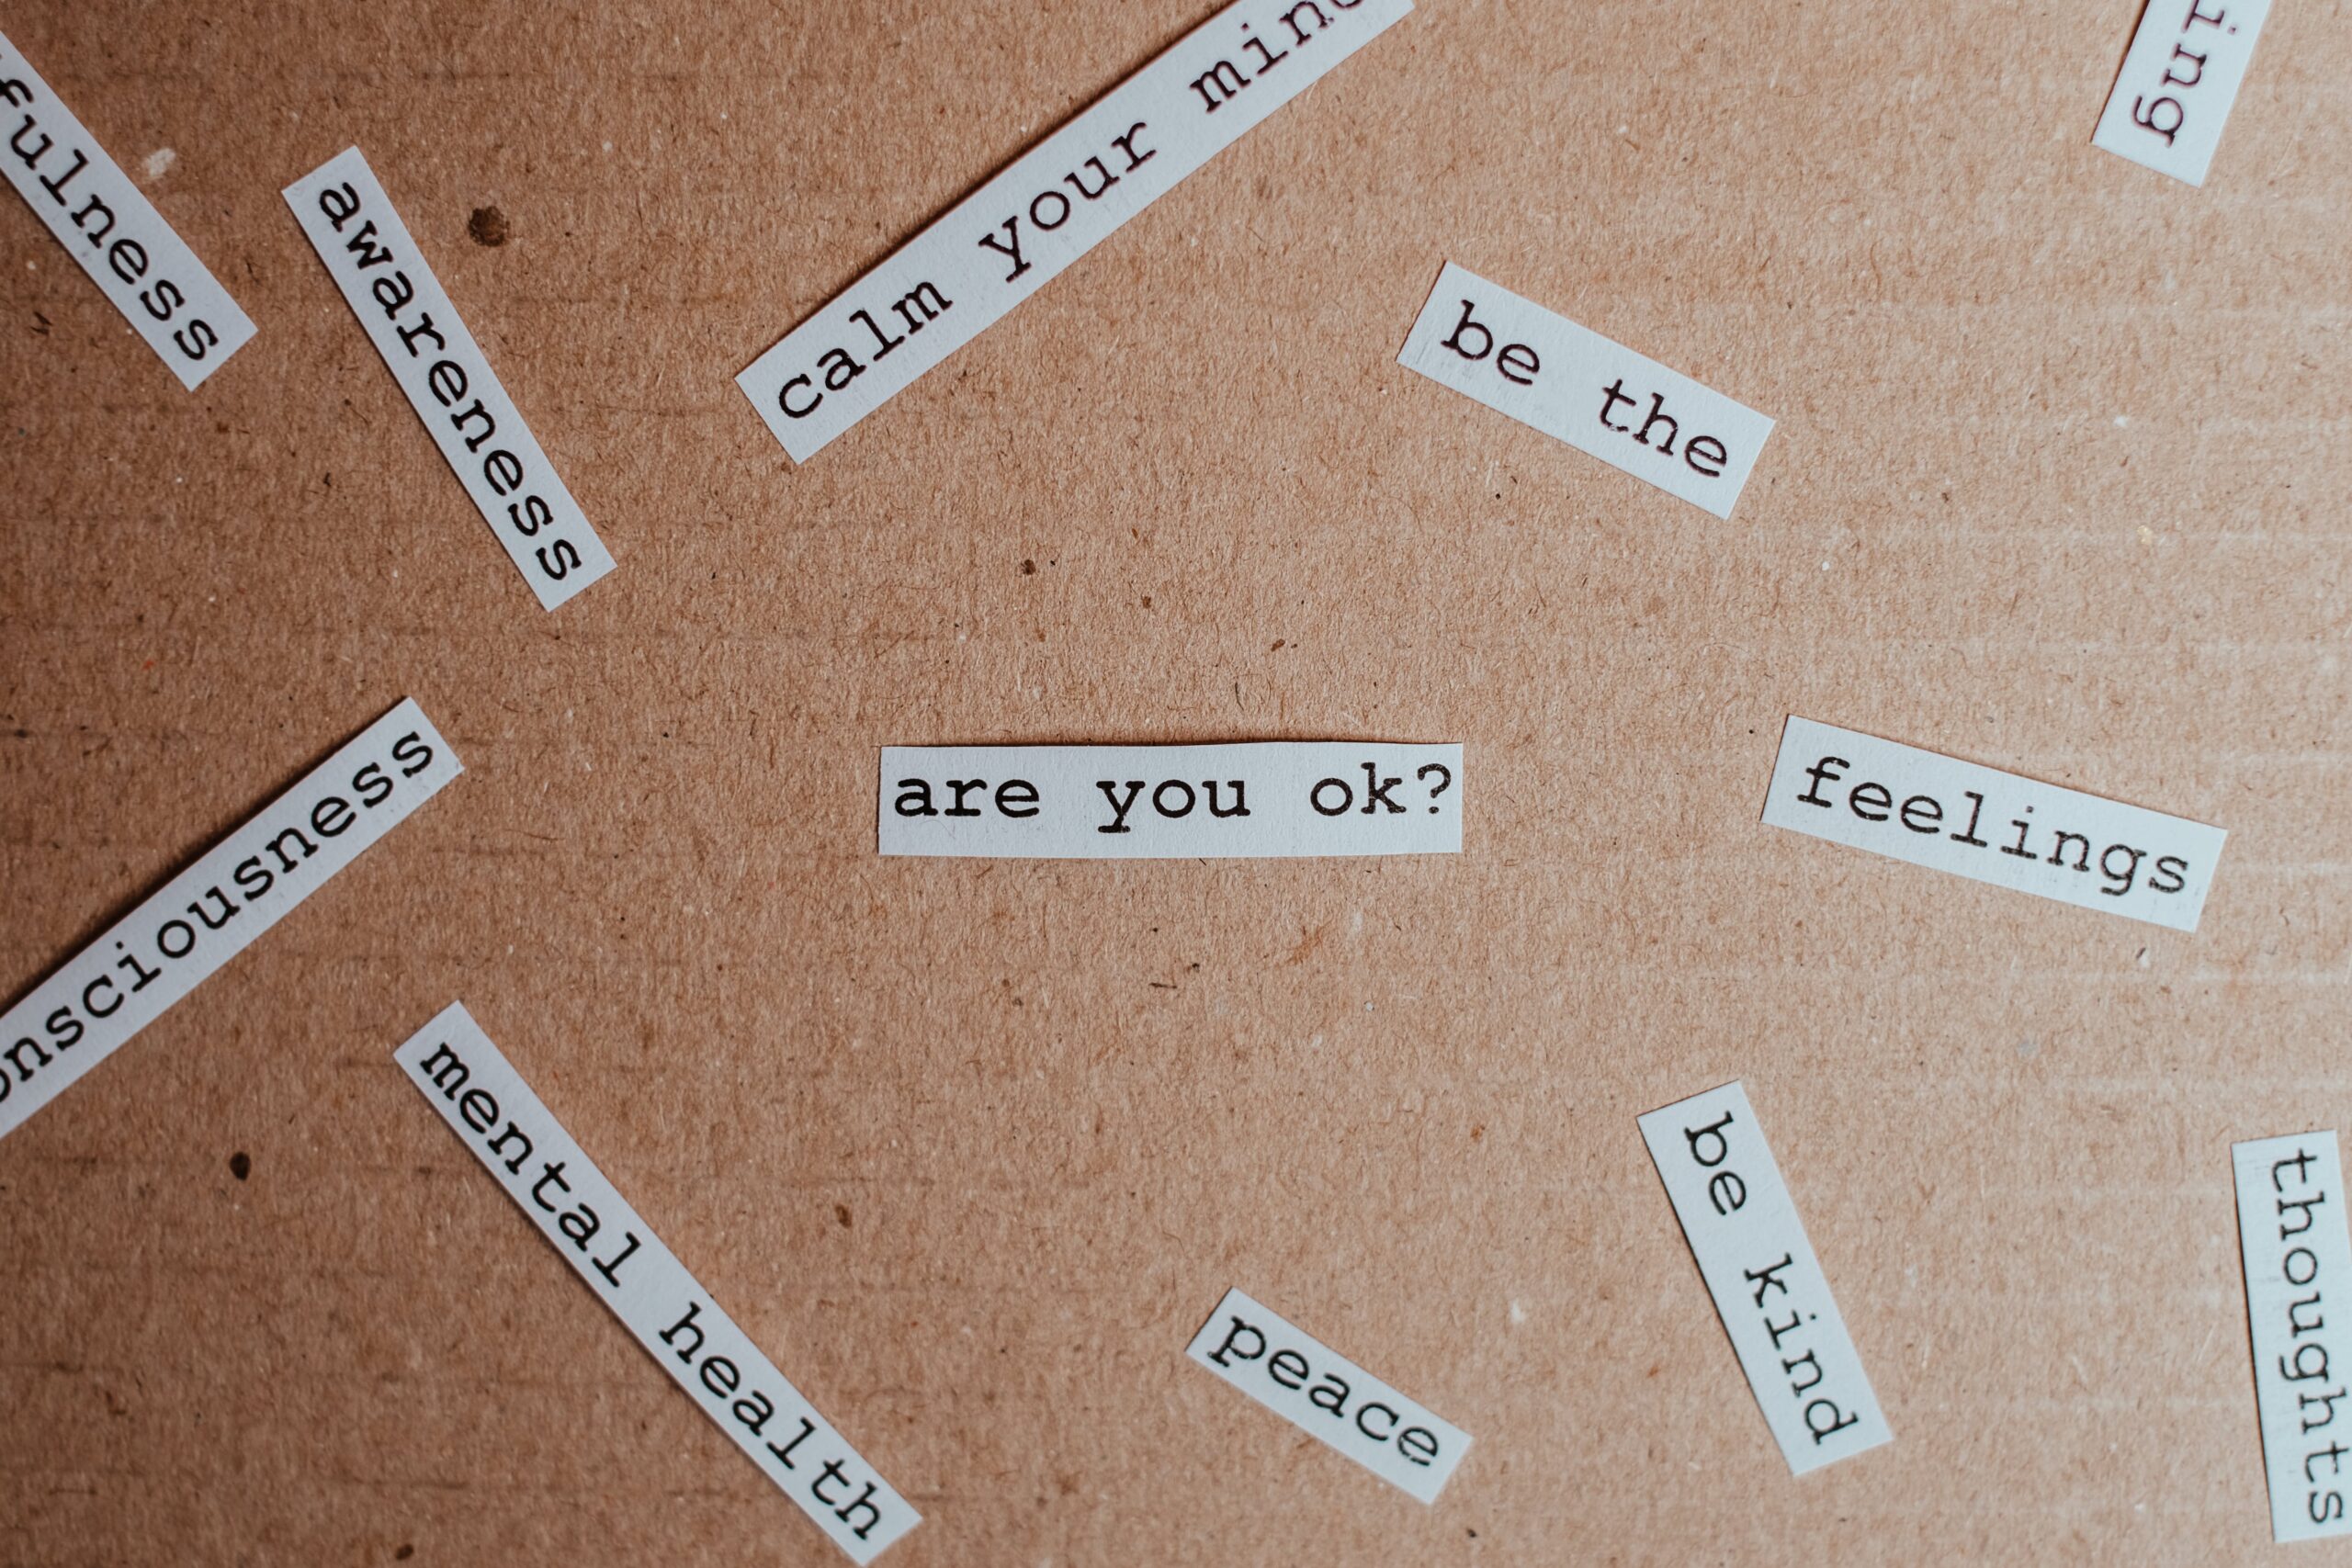 collection of cut-out words related to wellbeing and mental health scattered across a board